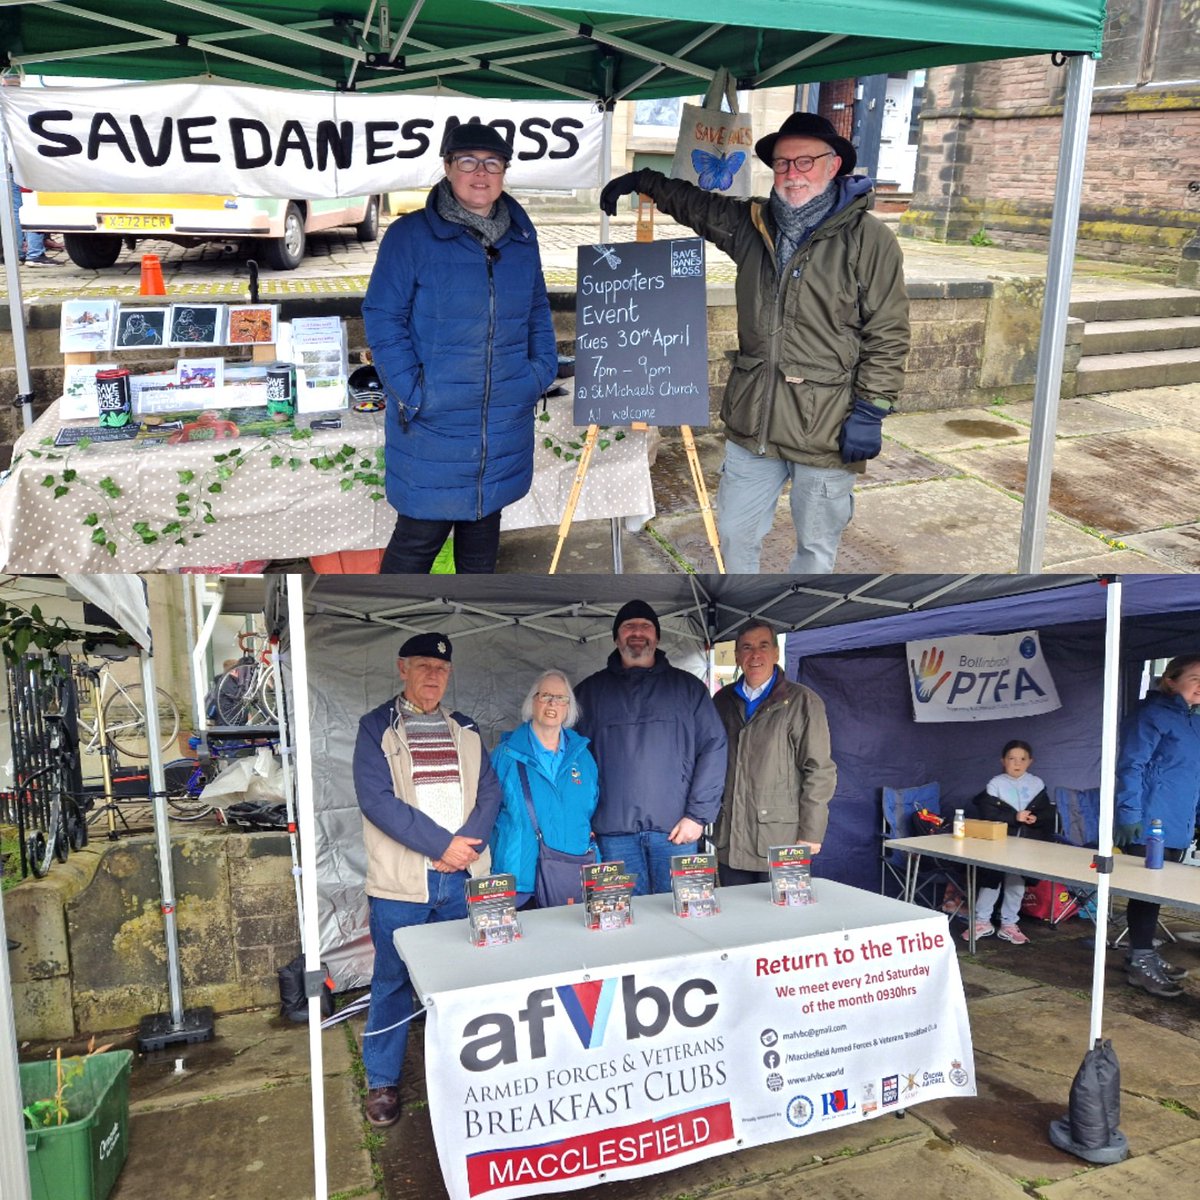 Another great opportunity for local groups to set out their stall at @treaclemarket on Sunday - from @DanesMoss working to protect our local environment to #Macclesfield @afvbc supporting veterans in our community. Thank you!